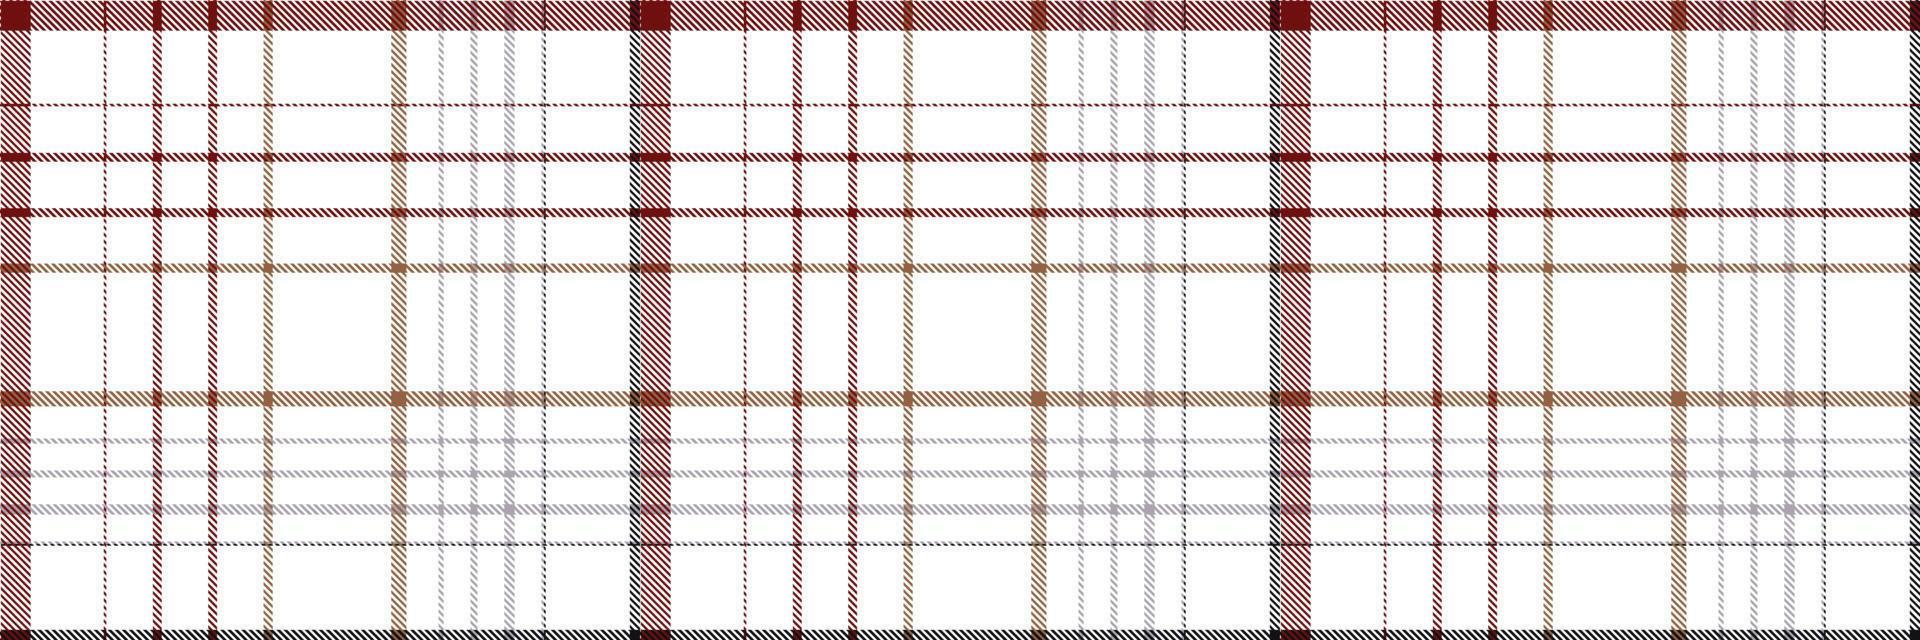 Check Plaid pattern is a patterned cloth consisting of criss crossed, horizontal and vertical bands in multiple colours.Seamless tartan for  scarf,pyjamas,blanket,duvet,kilt large shawl. vector